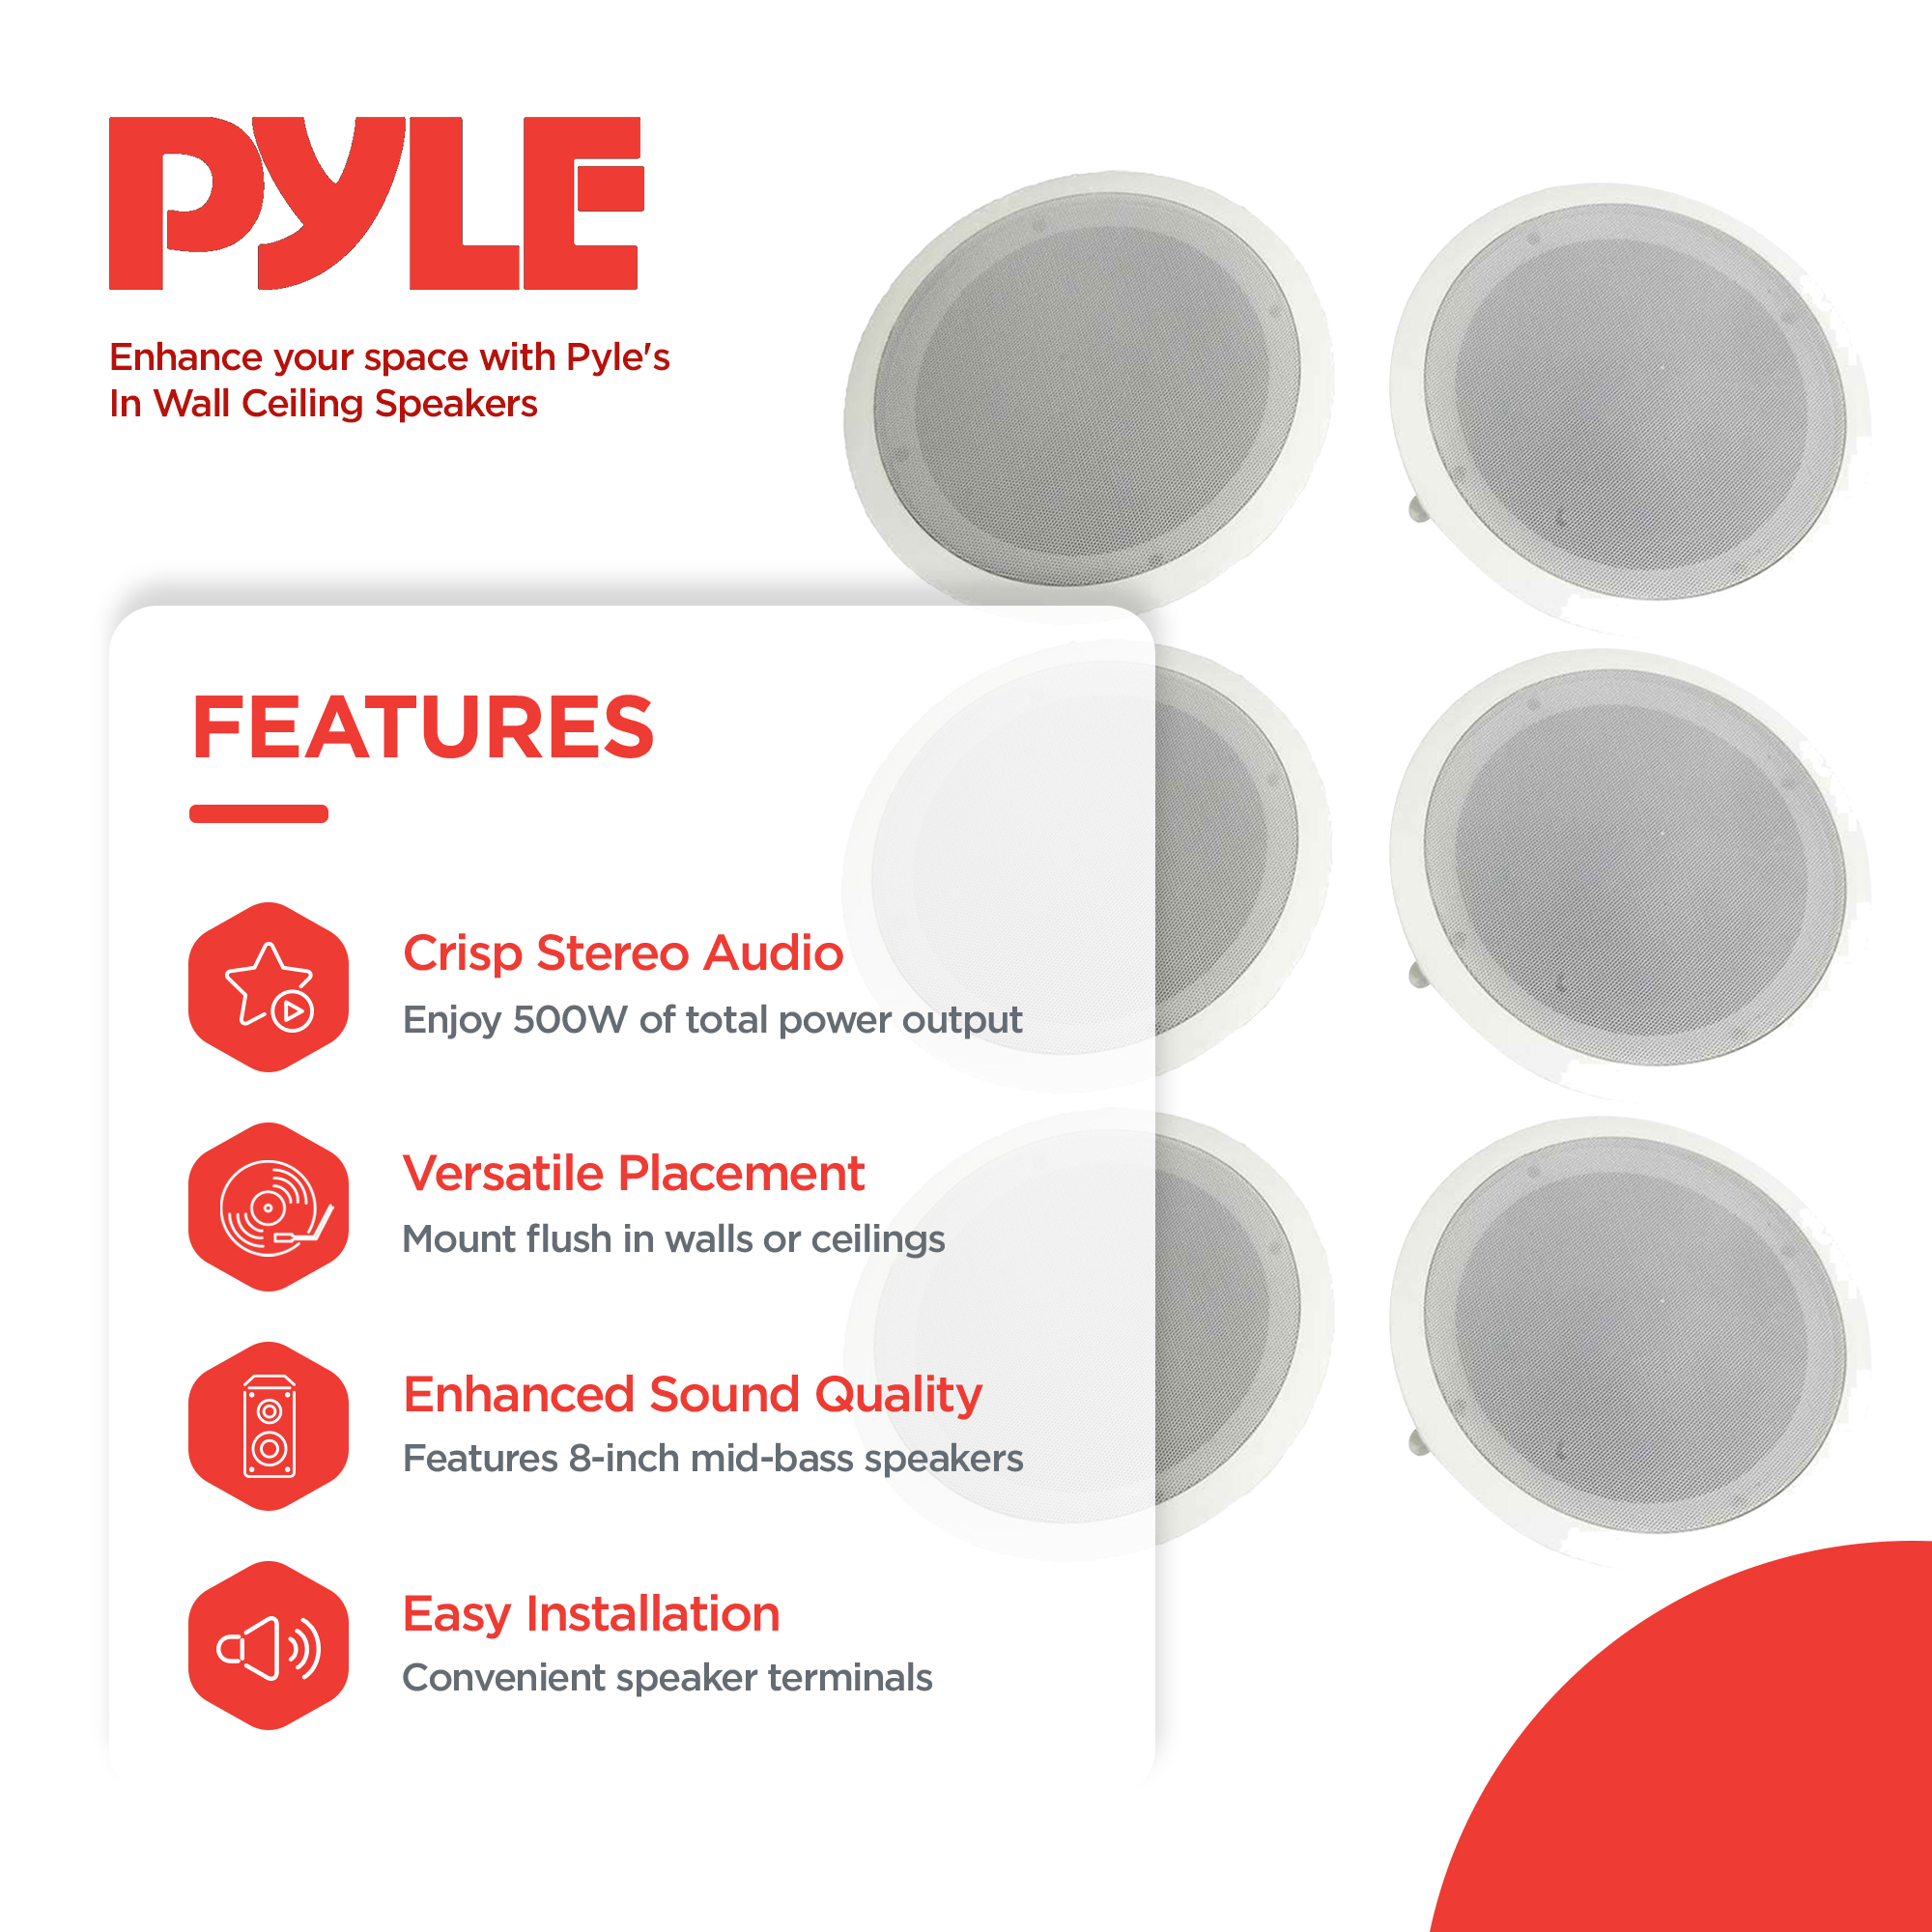 Pyle 8 Inch 2 Way In Wall Ceiling Home Speakers System Audio Stereo, 6 Speakers - image 2 of 11